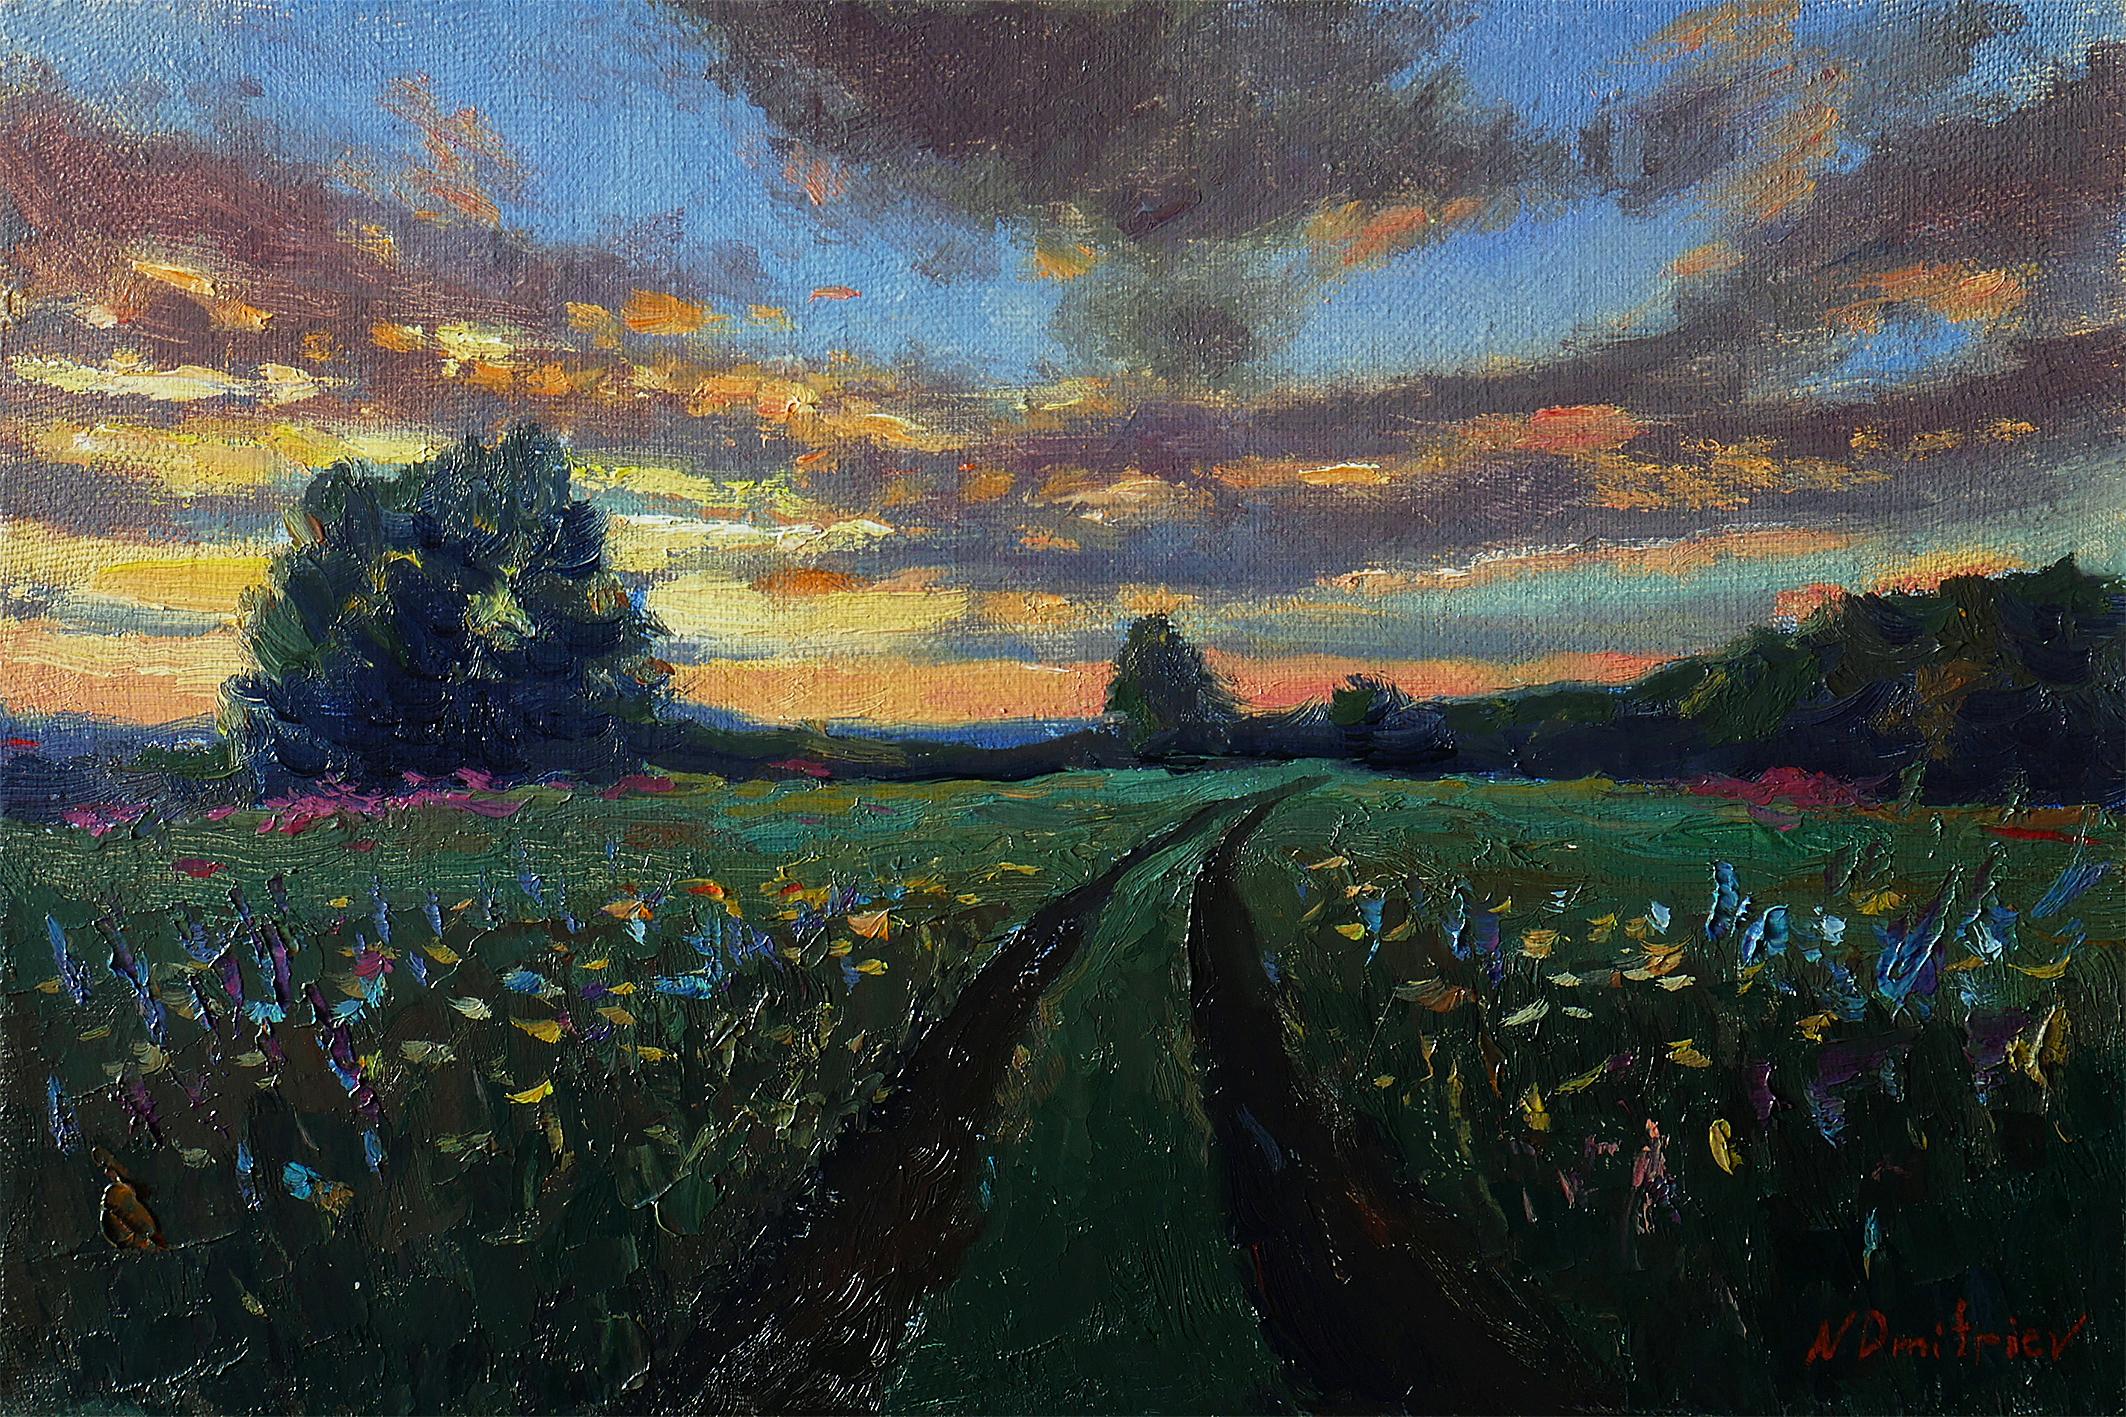 Nikolay Dmitriev Landscape Painting - Sunset Over Wildflowers Field - summer landscape painting